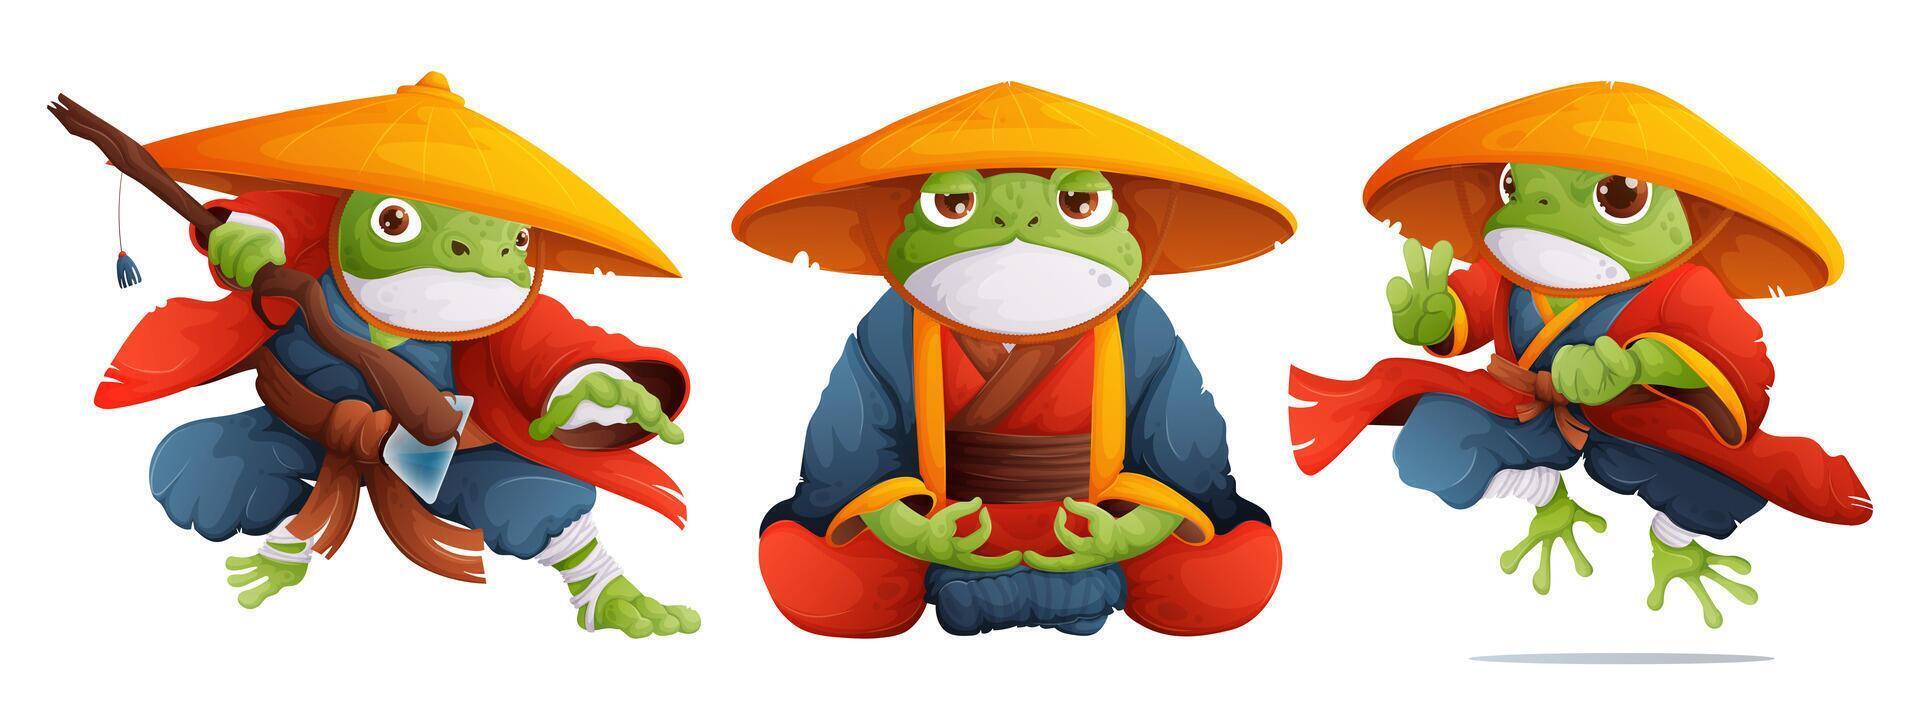 A set of three toads in the form of kung fu masters in a red and blue kimono and a yellow straw hat. A frog monk in a lotus position meditates, a green toad in a dynamic kung fu pose. Cartoon style vector